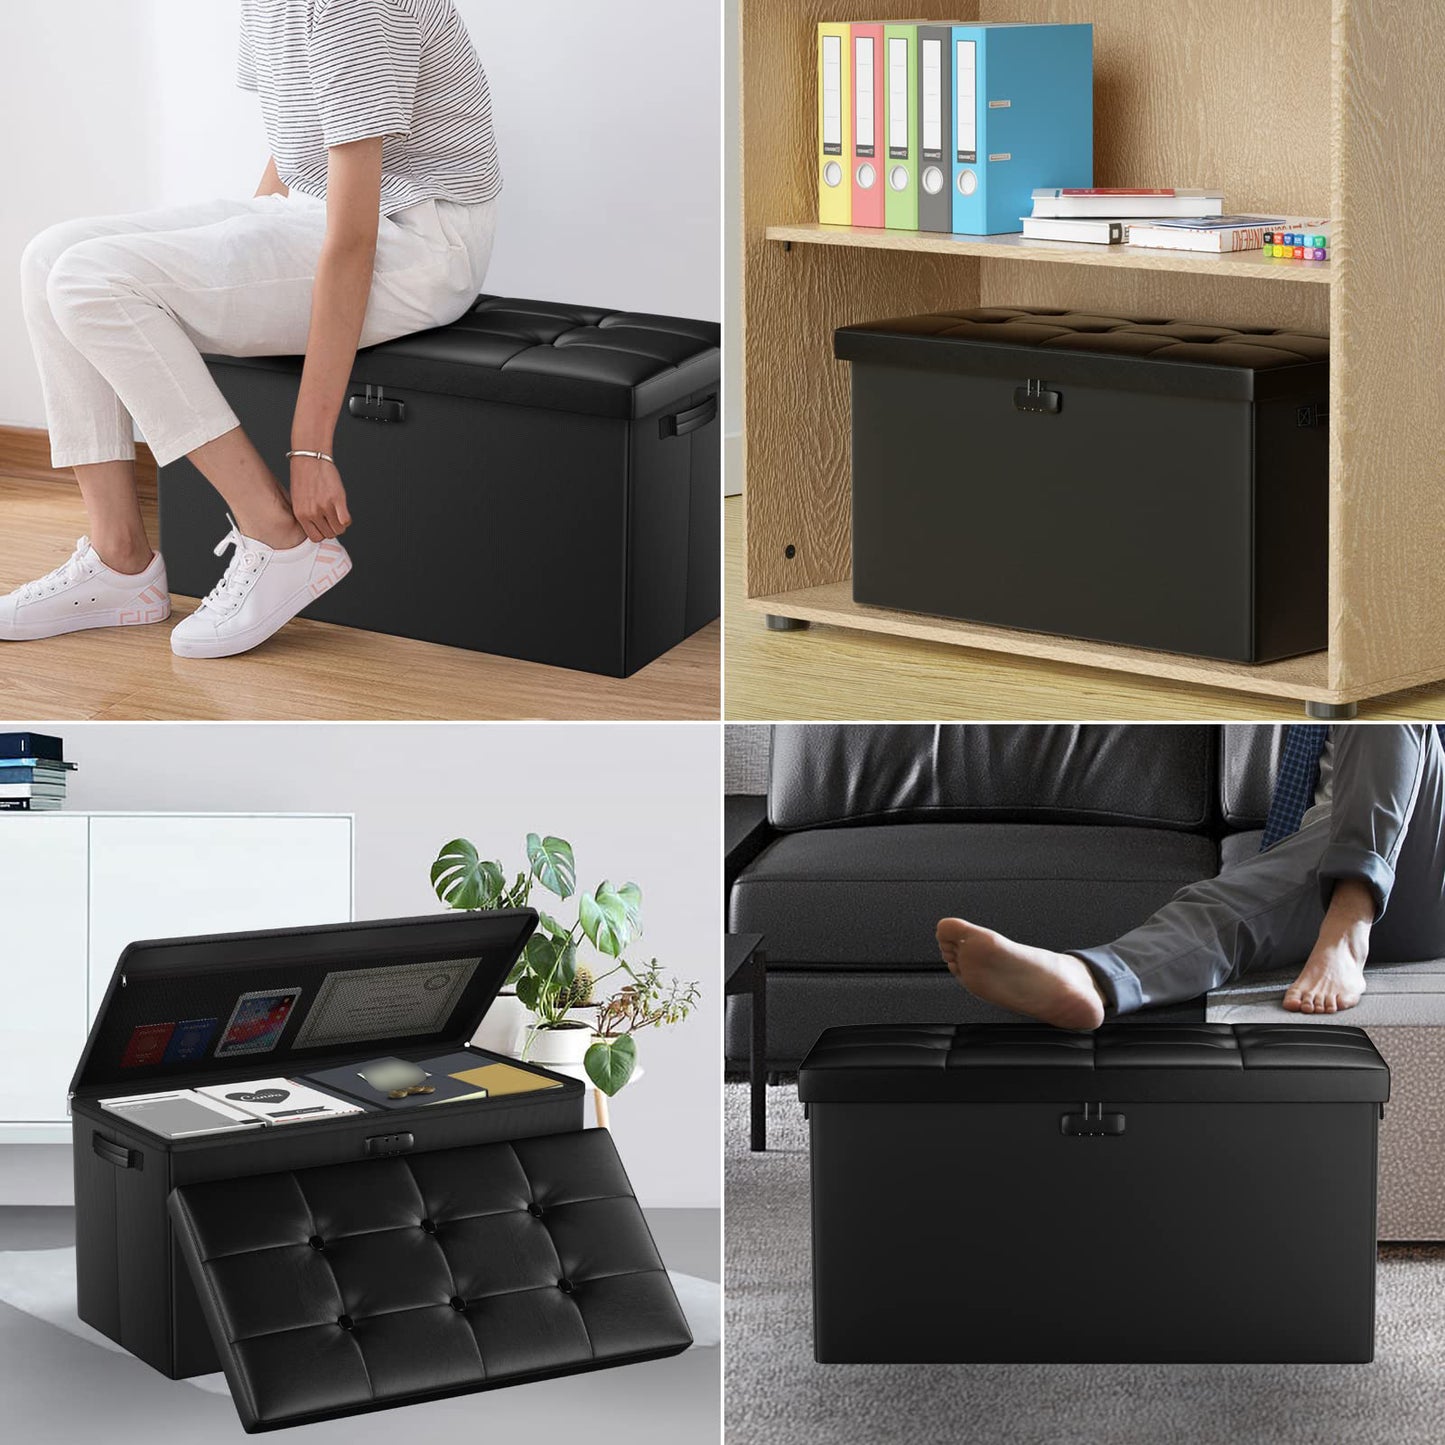 ENGPOW Storage Bench, Fireproof Folding Storage Bench with Lock, 76.2cm Fireproof and Waterproof Storage Chest Footstool Leather Bedroom Bench, Can Store Documents, Valuables, Black